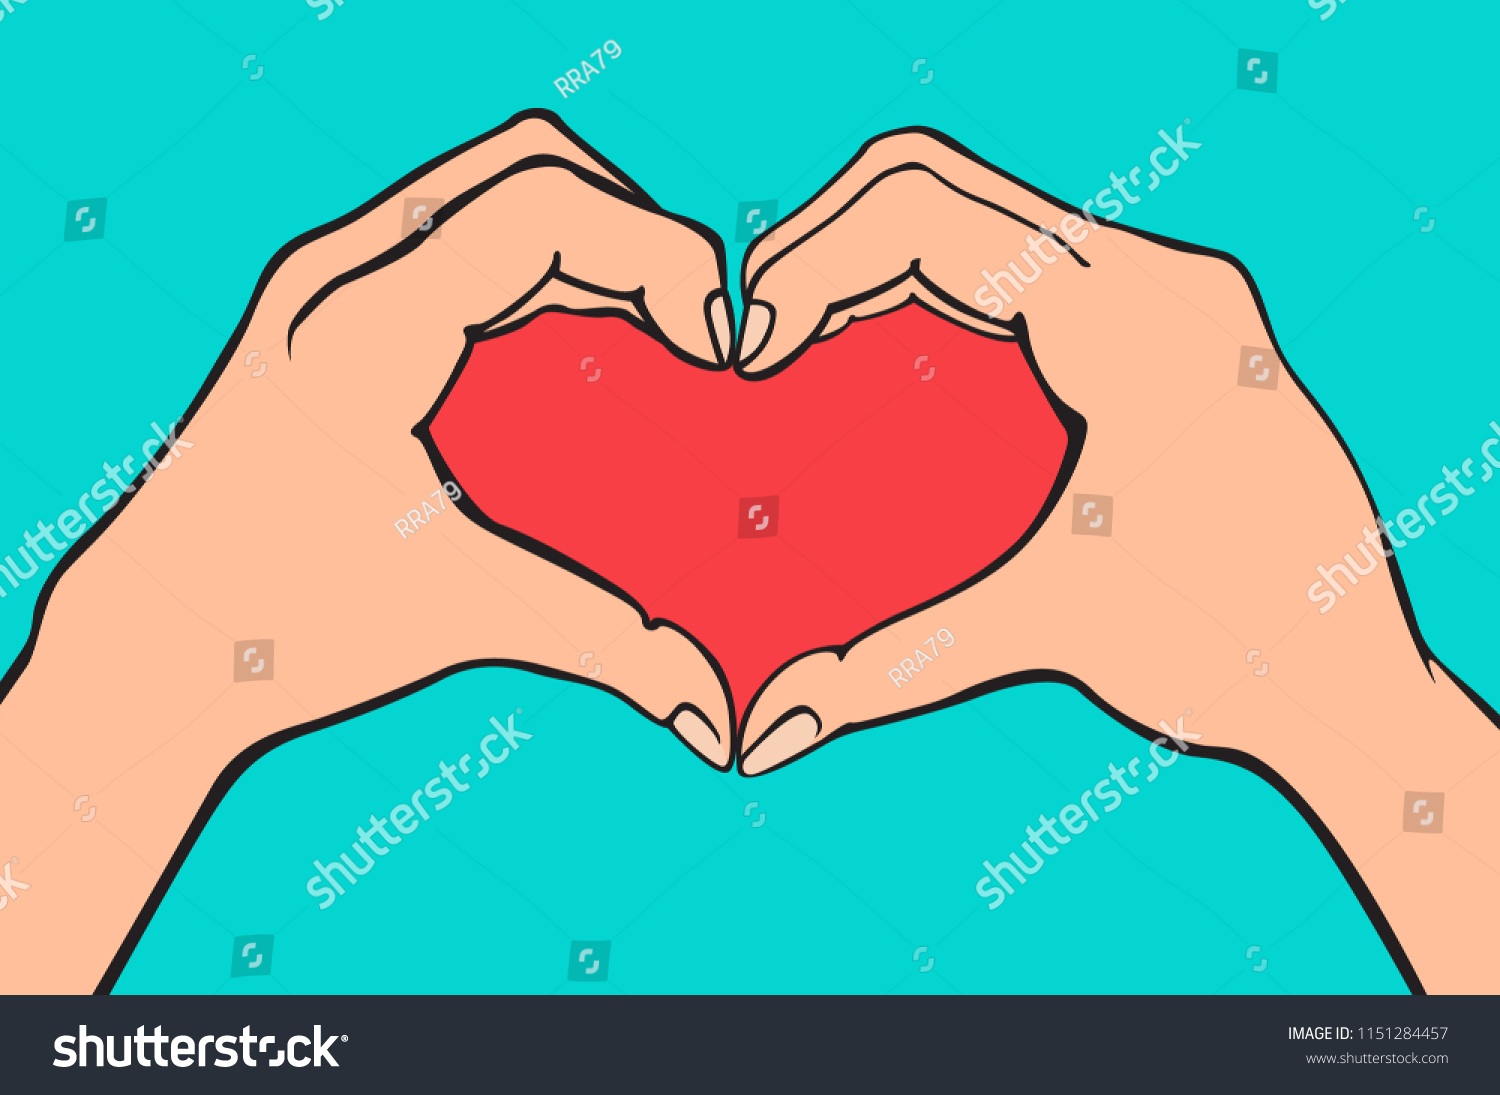 Two Hands Making Heart Sign Love Stock Vector Royalty Free 1151284457 Shutterstock 